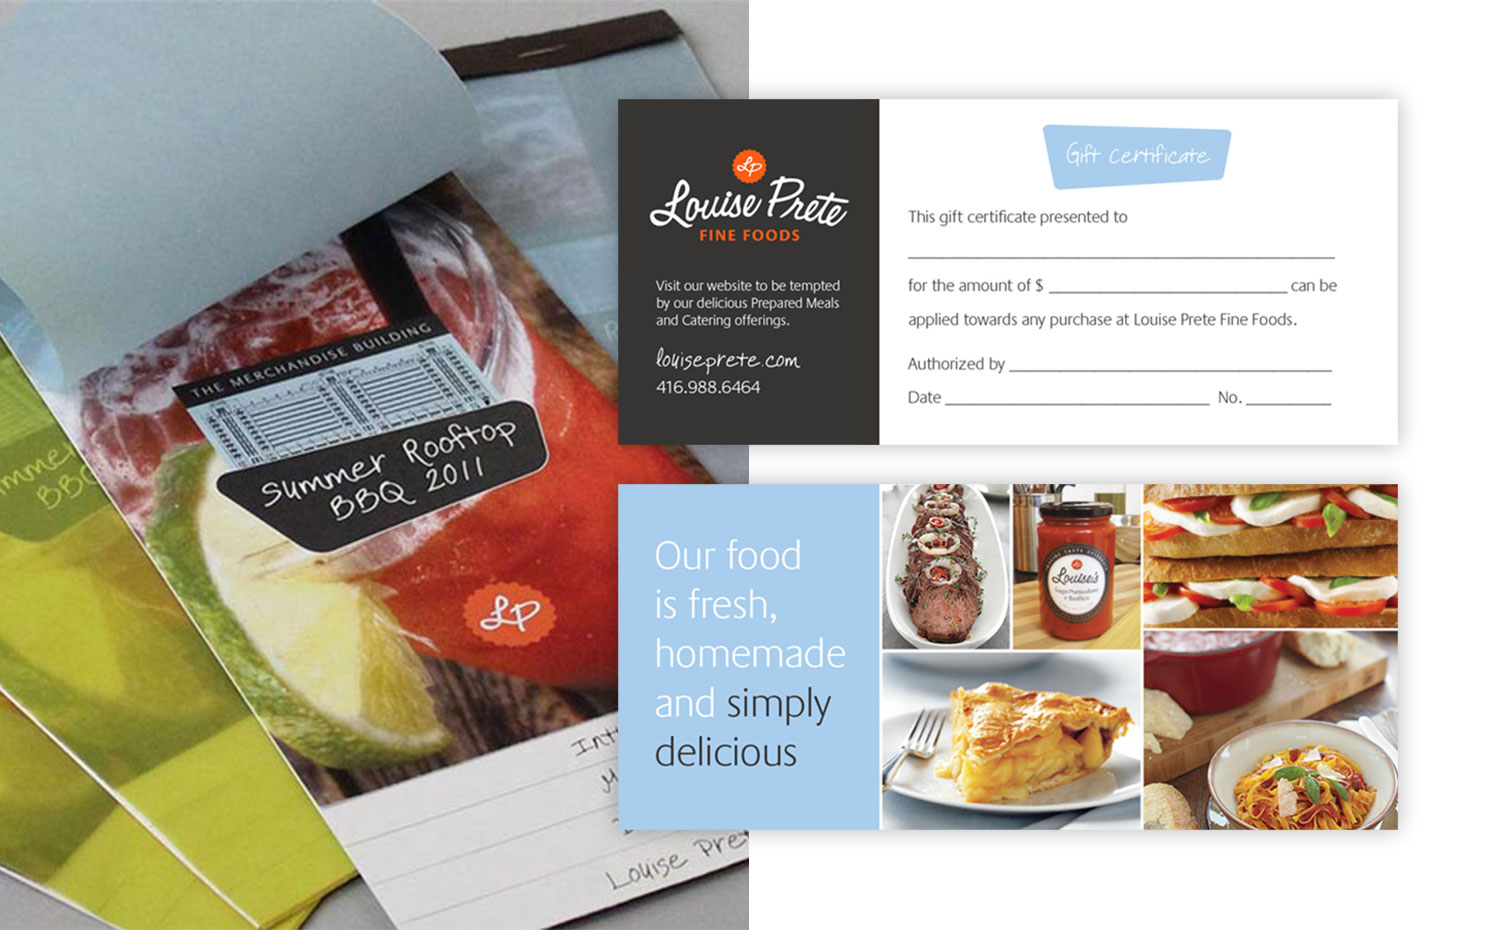 Louise Prete Fine Foods - Special event and promotional marketing